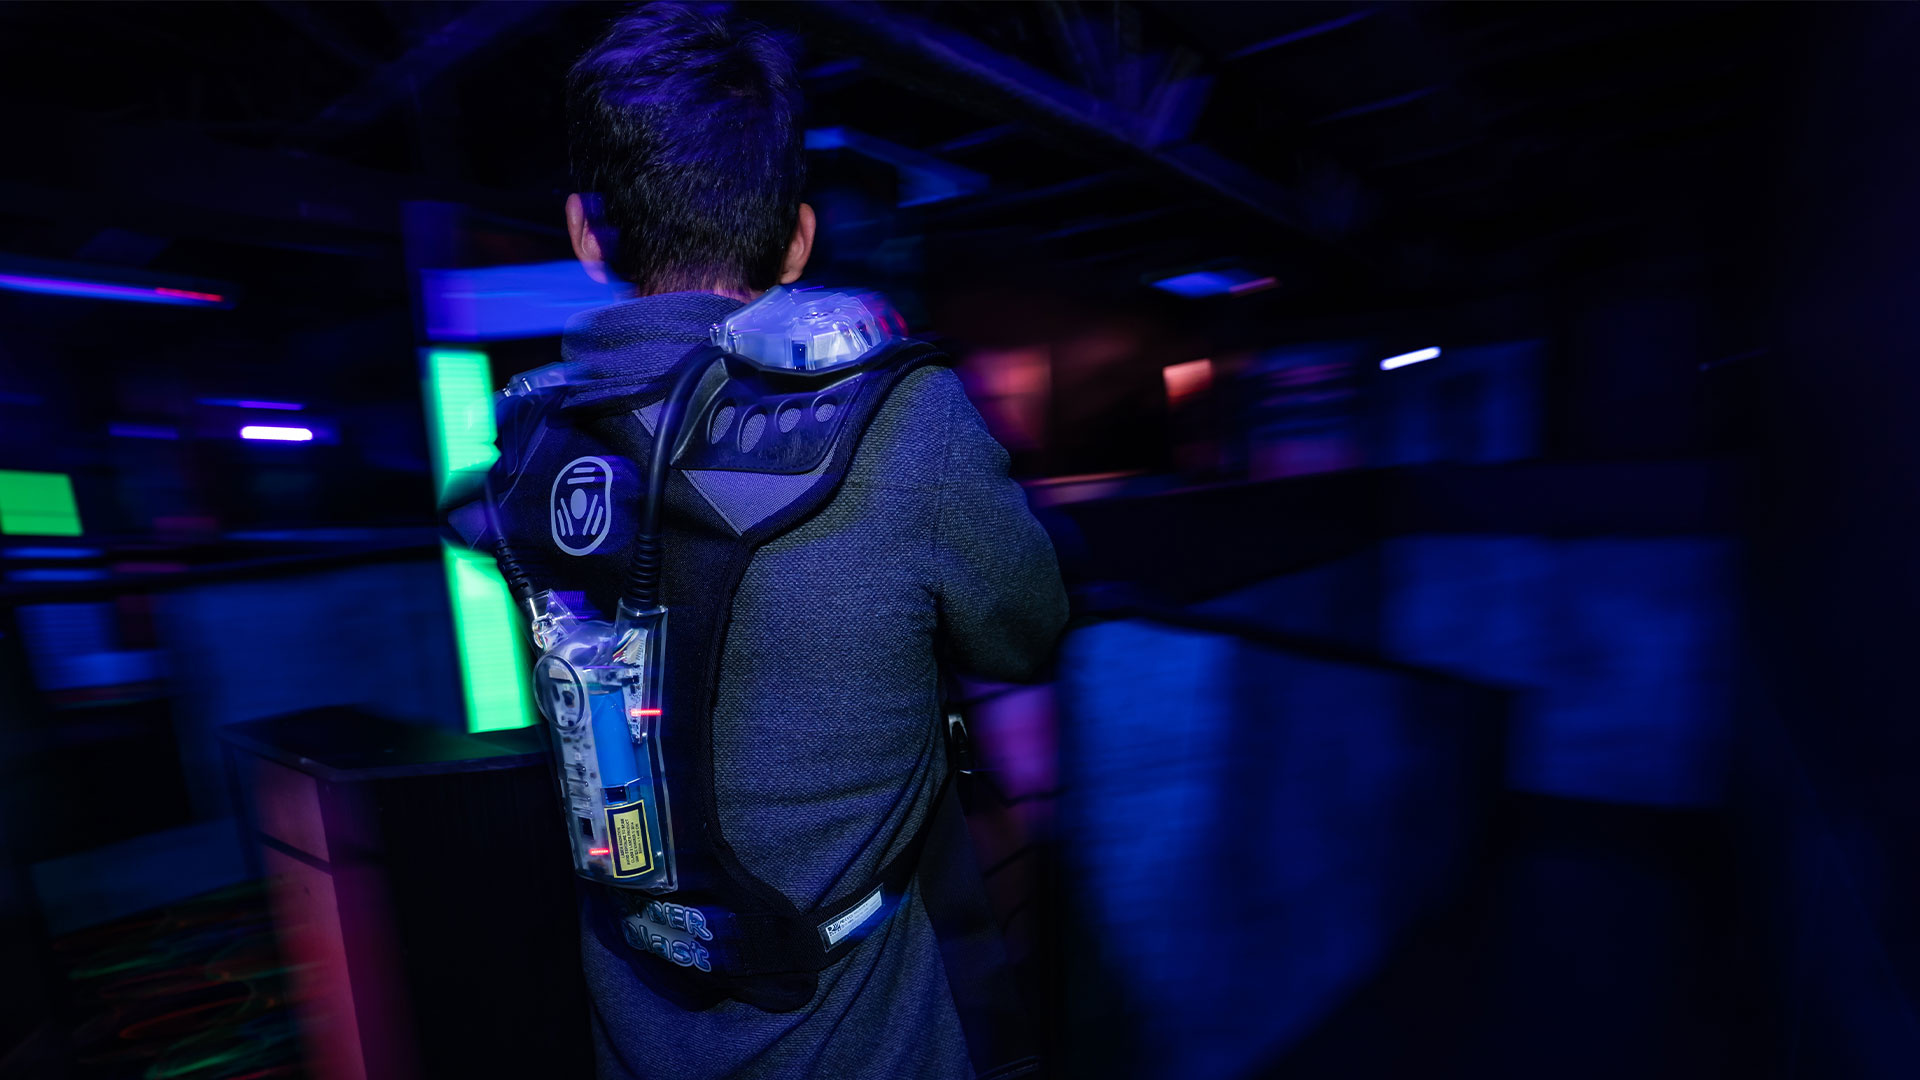 Laser Tag: A shooter equipped with a special vest with infrared sensor and LED lights, Light guns sports equipment. 1920x1080 Full HD Background.